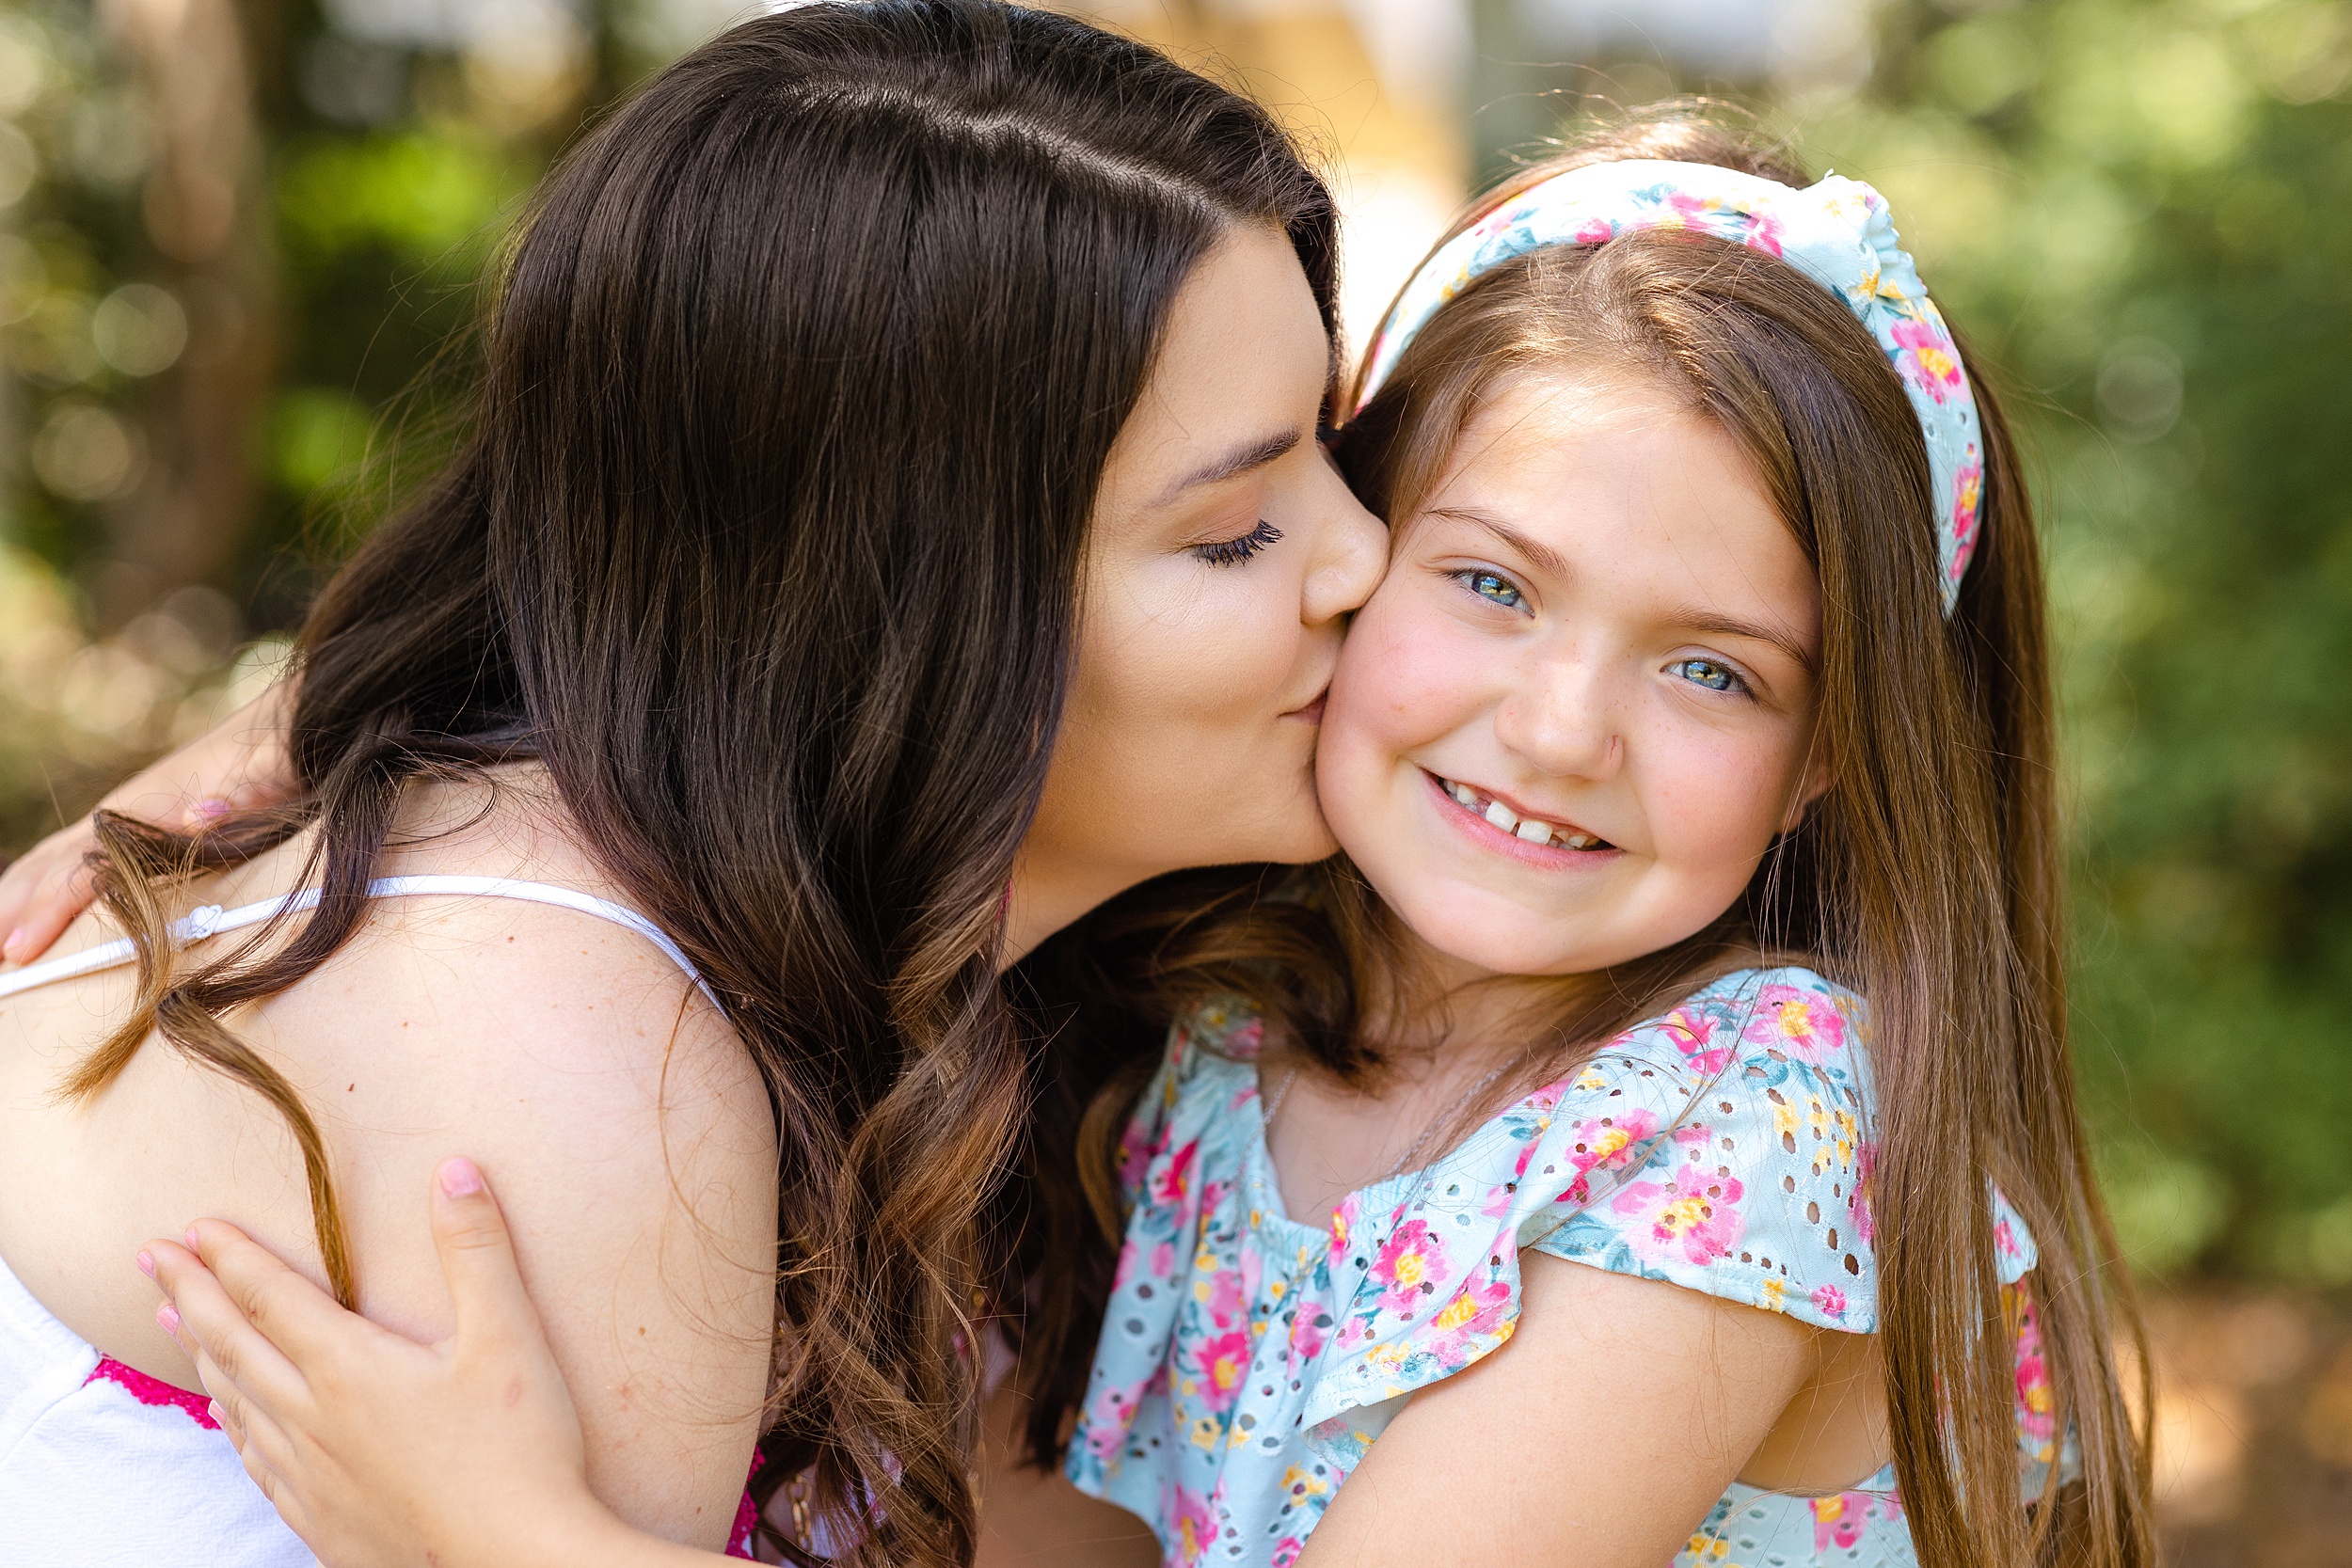 A mother with dark hair and a white dress kisses the cheek of her young daughter in a colorful floral dress and matching headband in savannah playgrounds